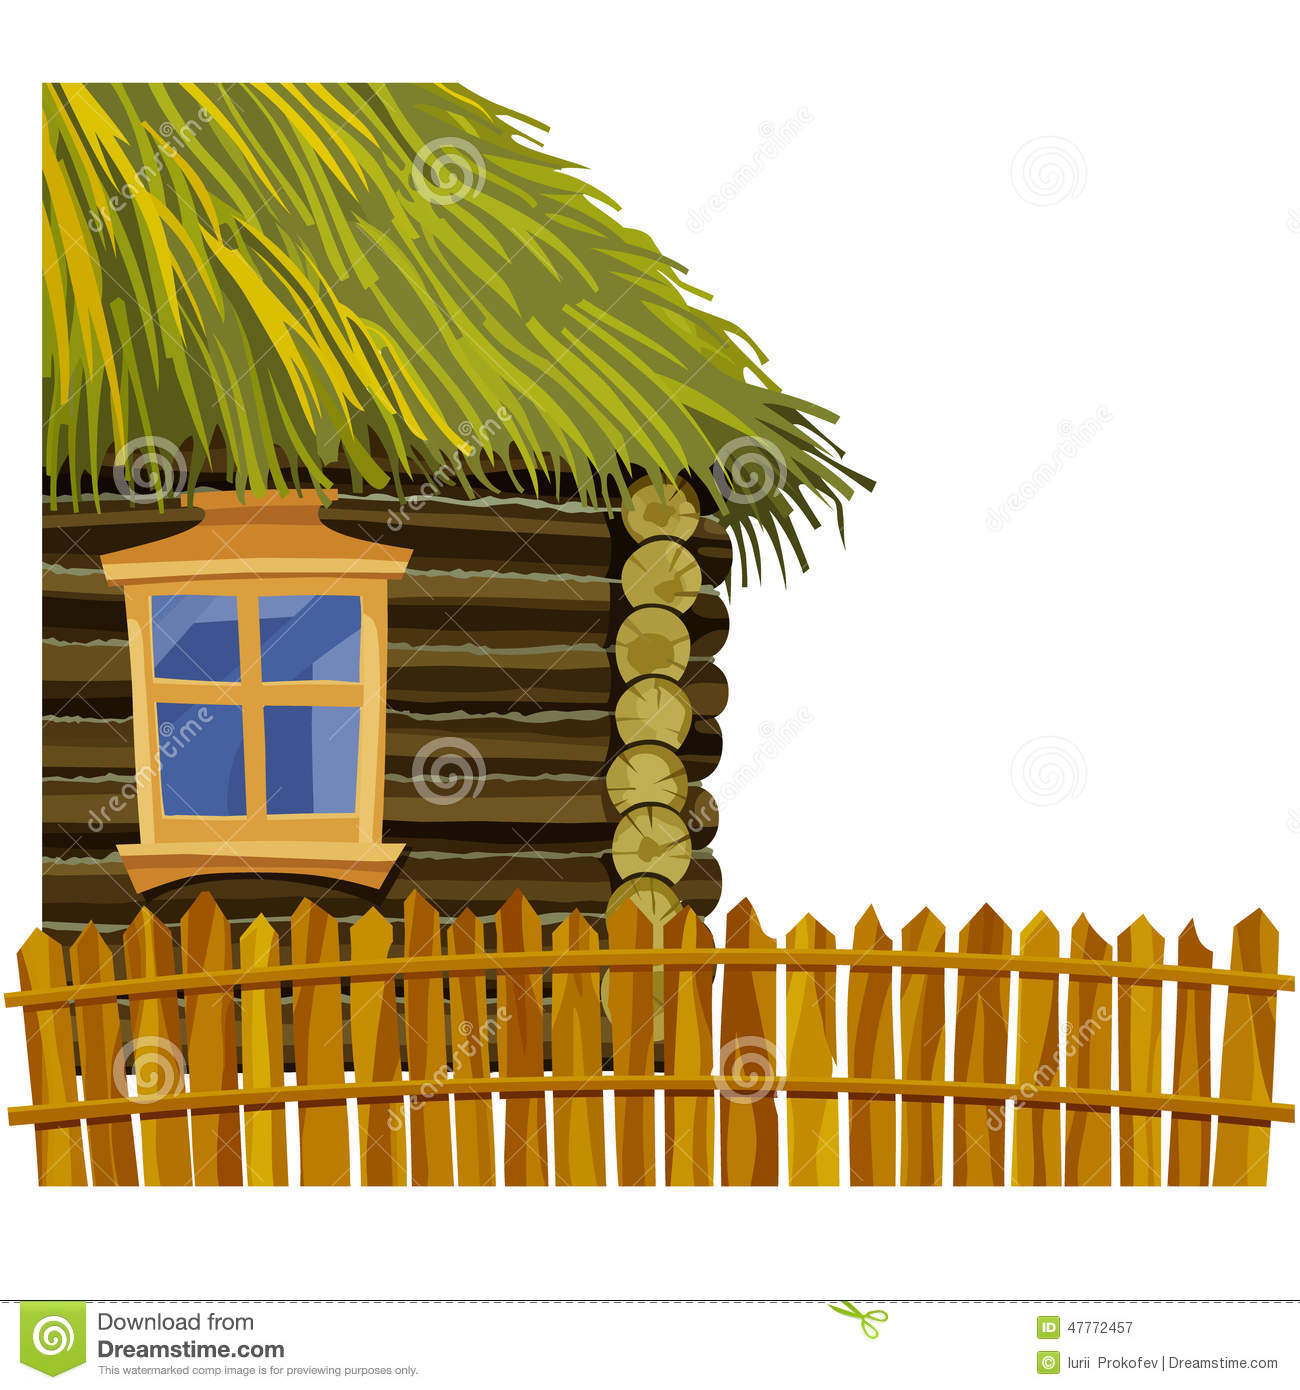 Thatch roof house clipart.